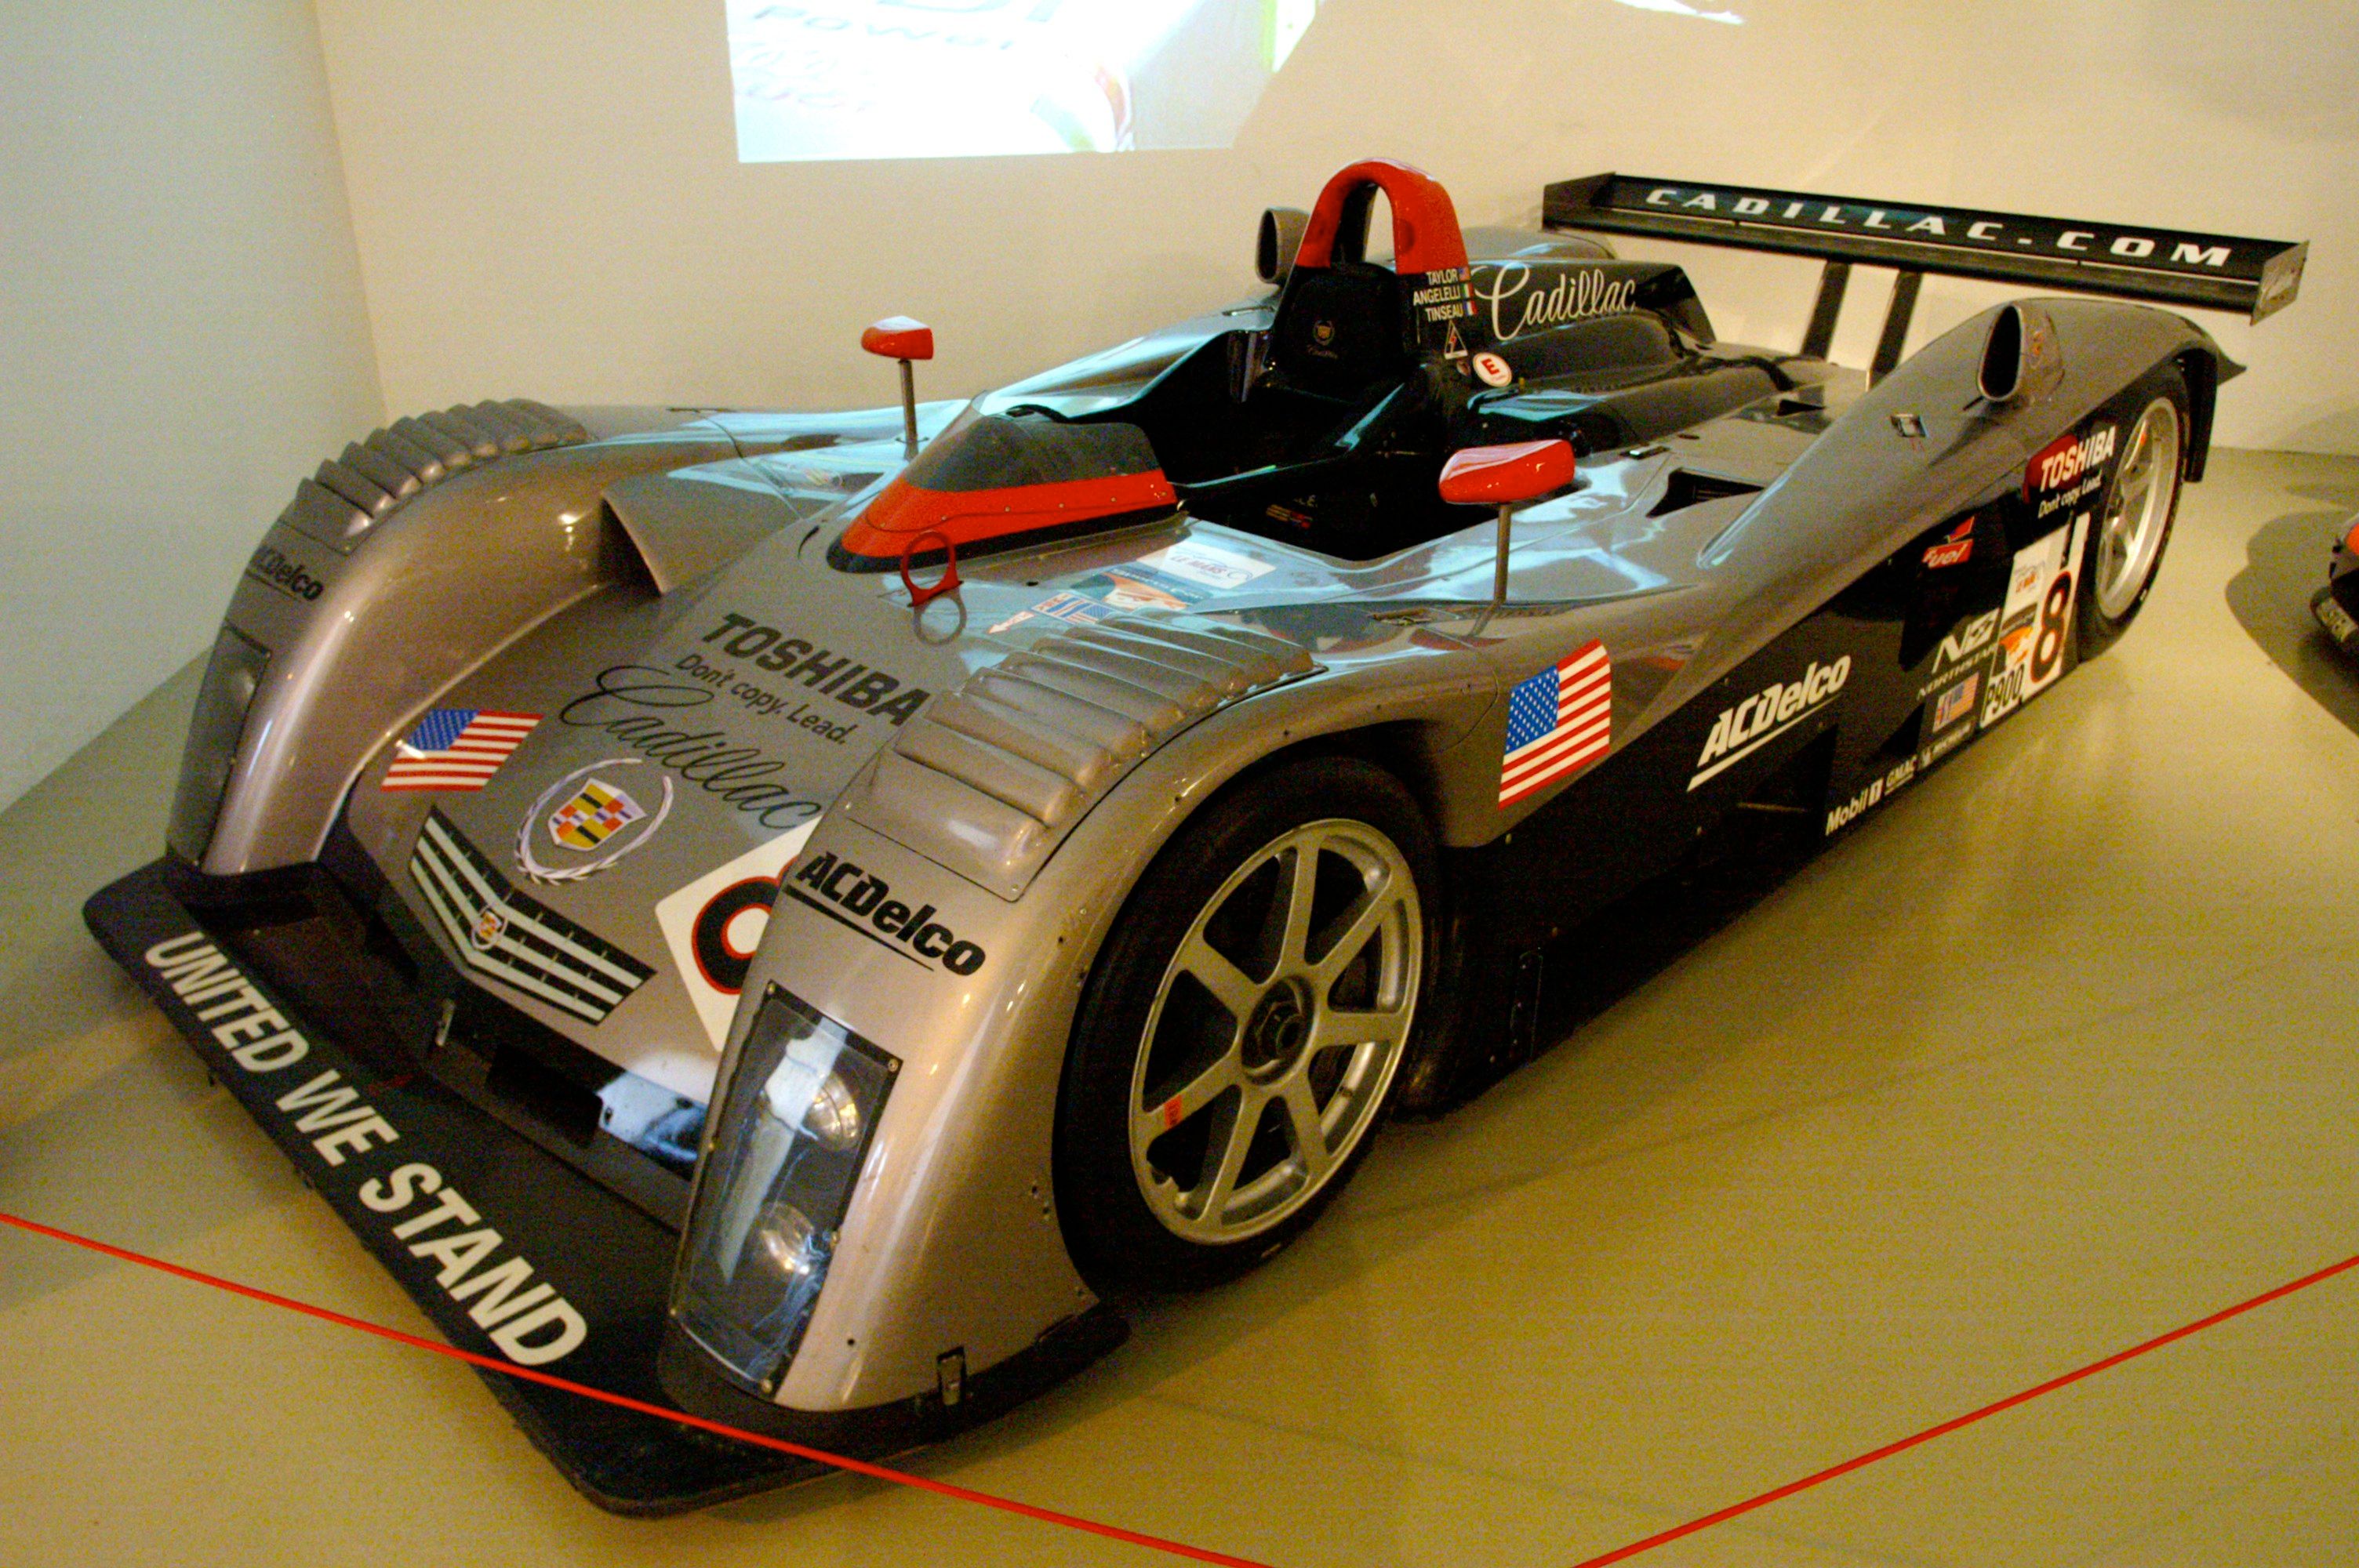 Cadillac Northstar LMP 900 front angle view parked indoors